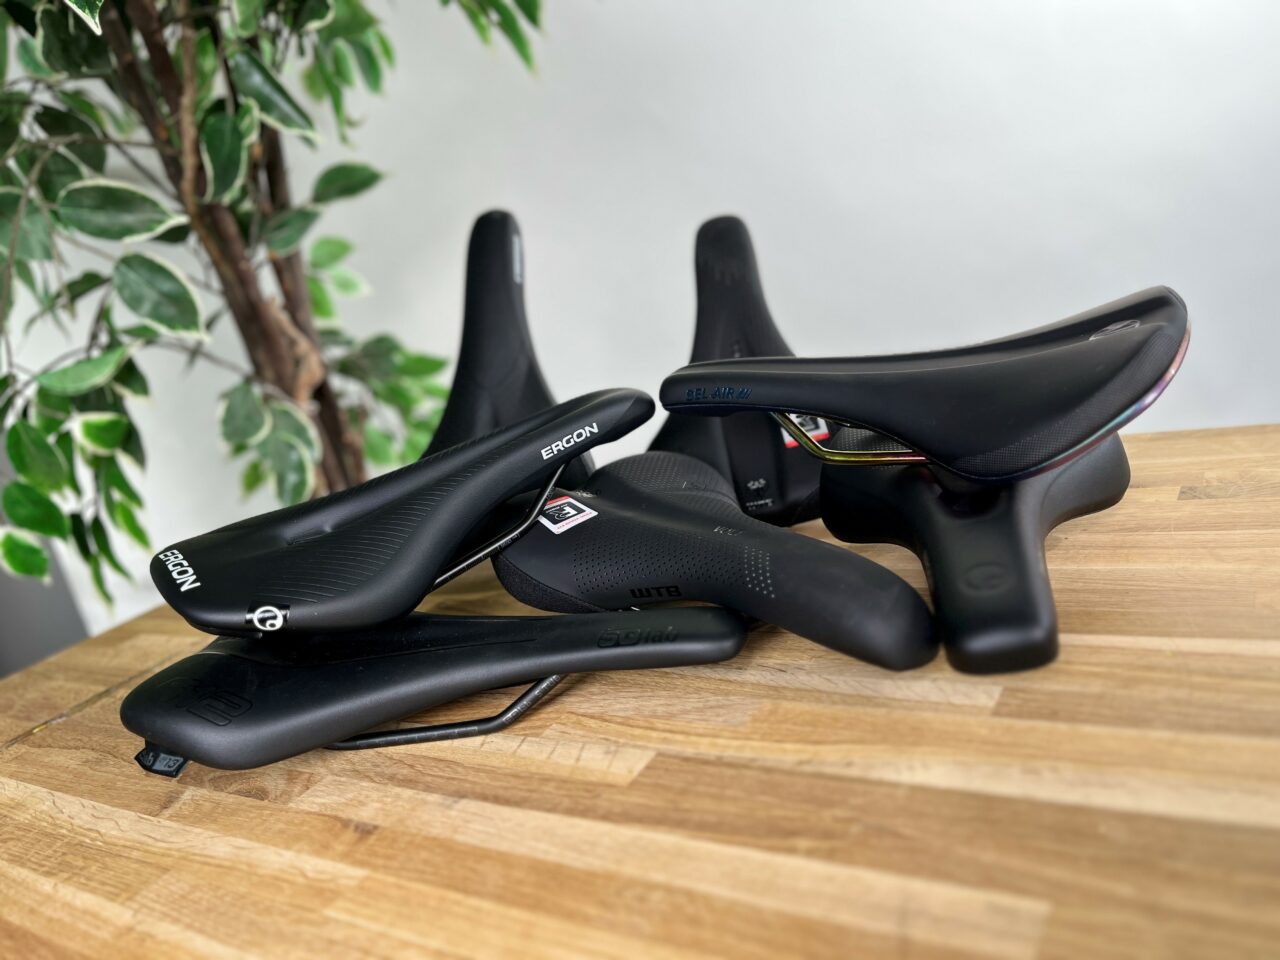 The best bicycle saddle YOU can buy!